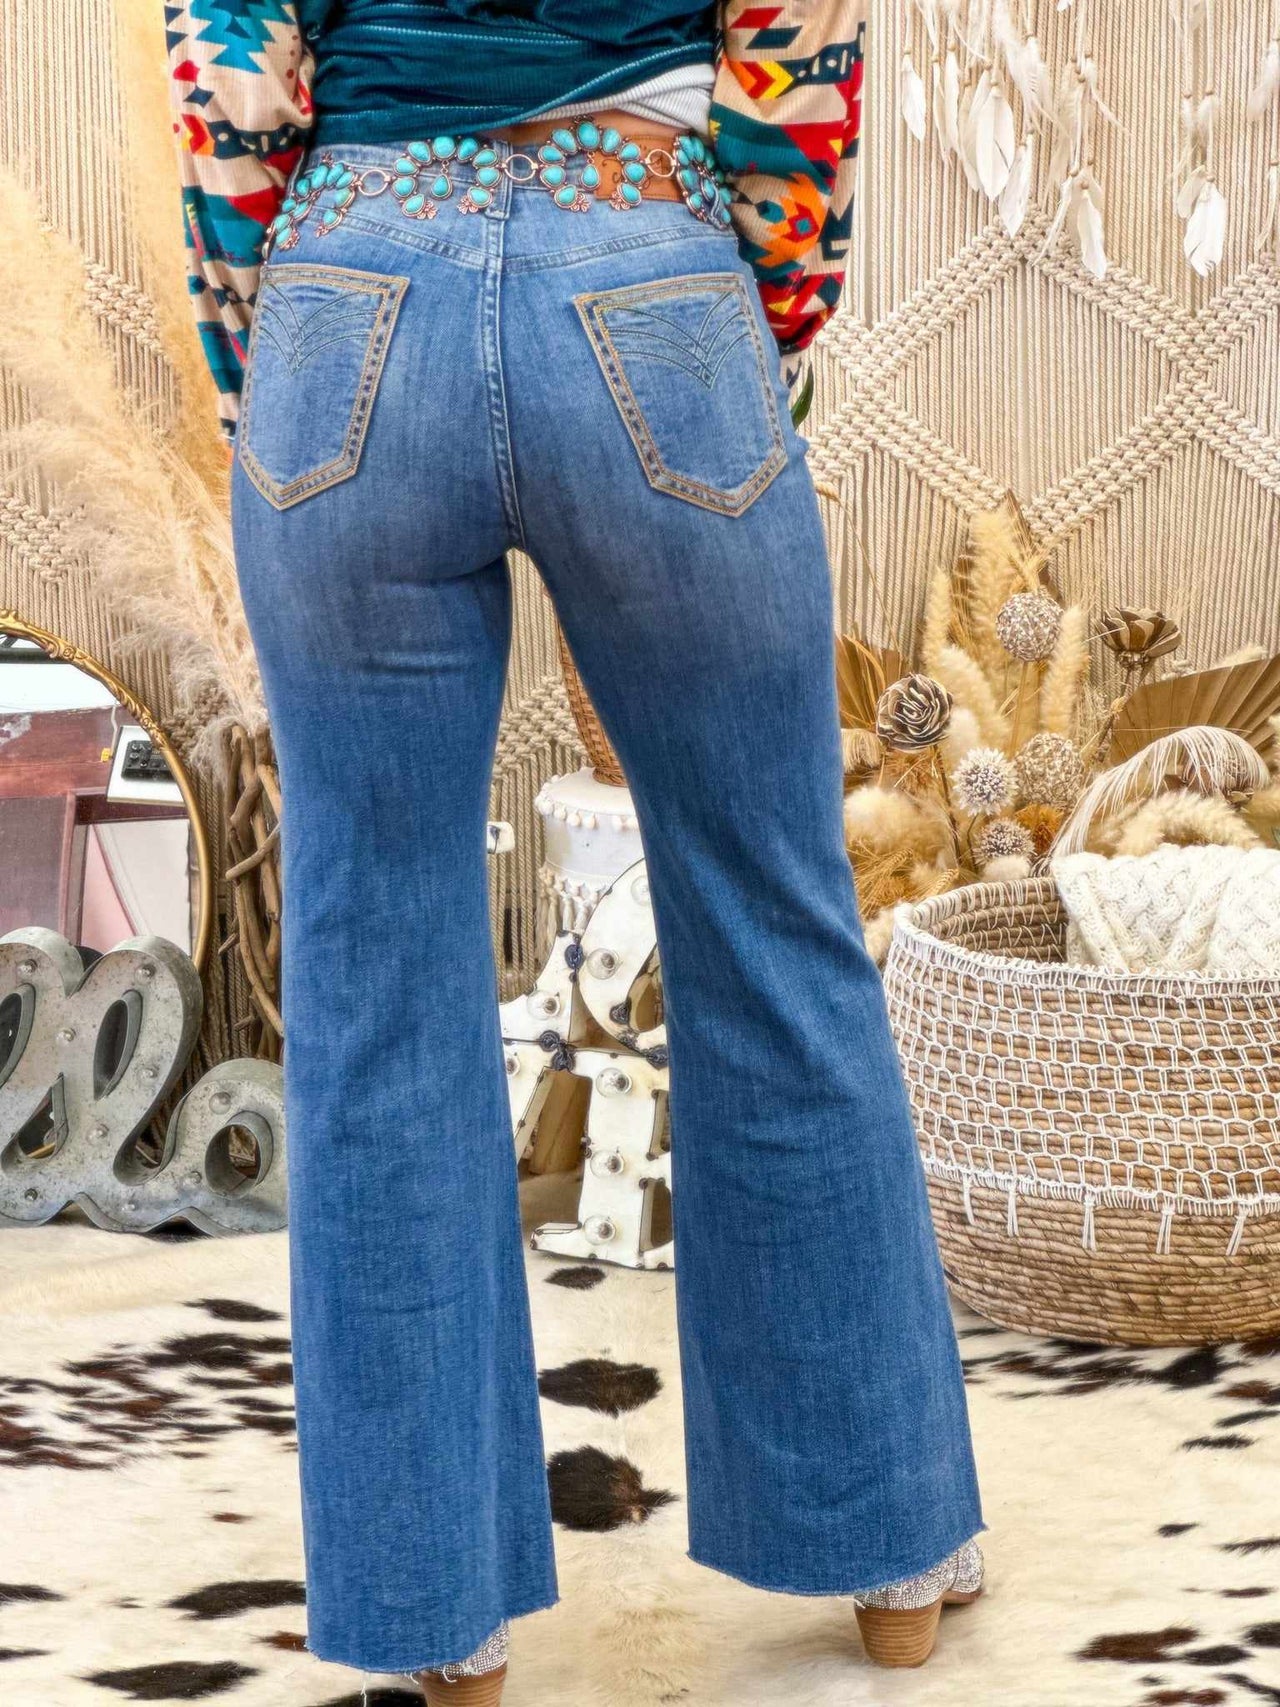 Super Flared Bell Bottom Jeans | Wedges and Wide Legs Small / Dark Denim